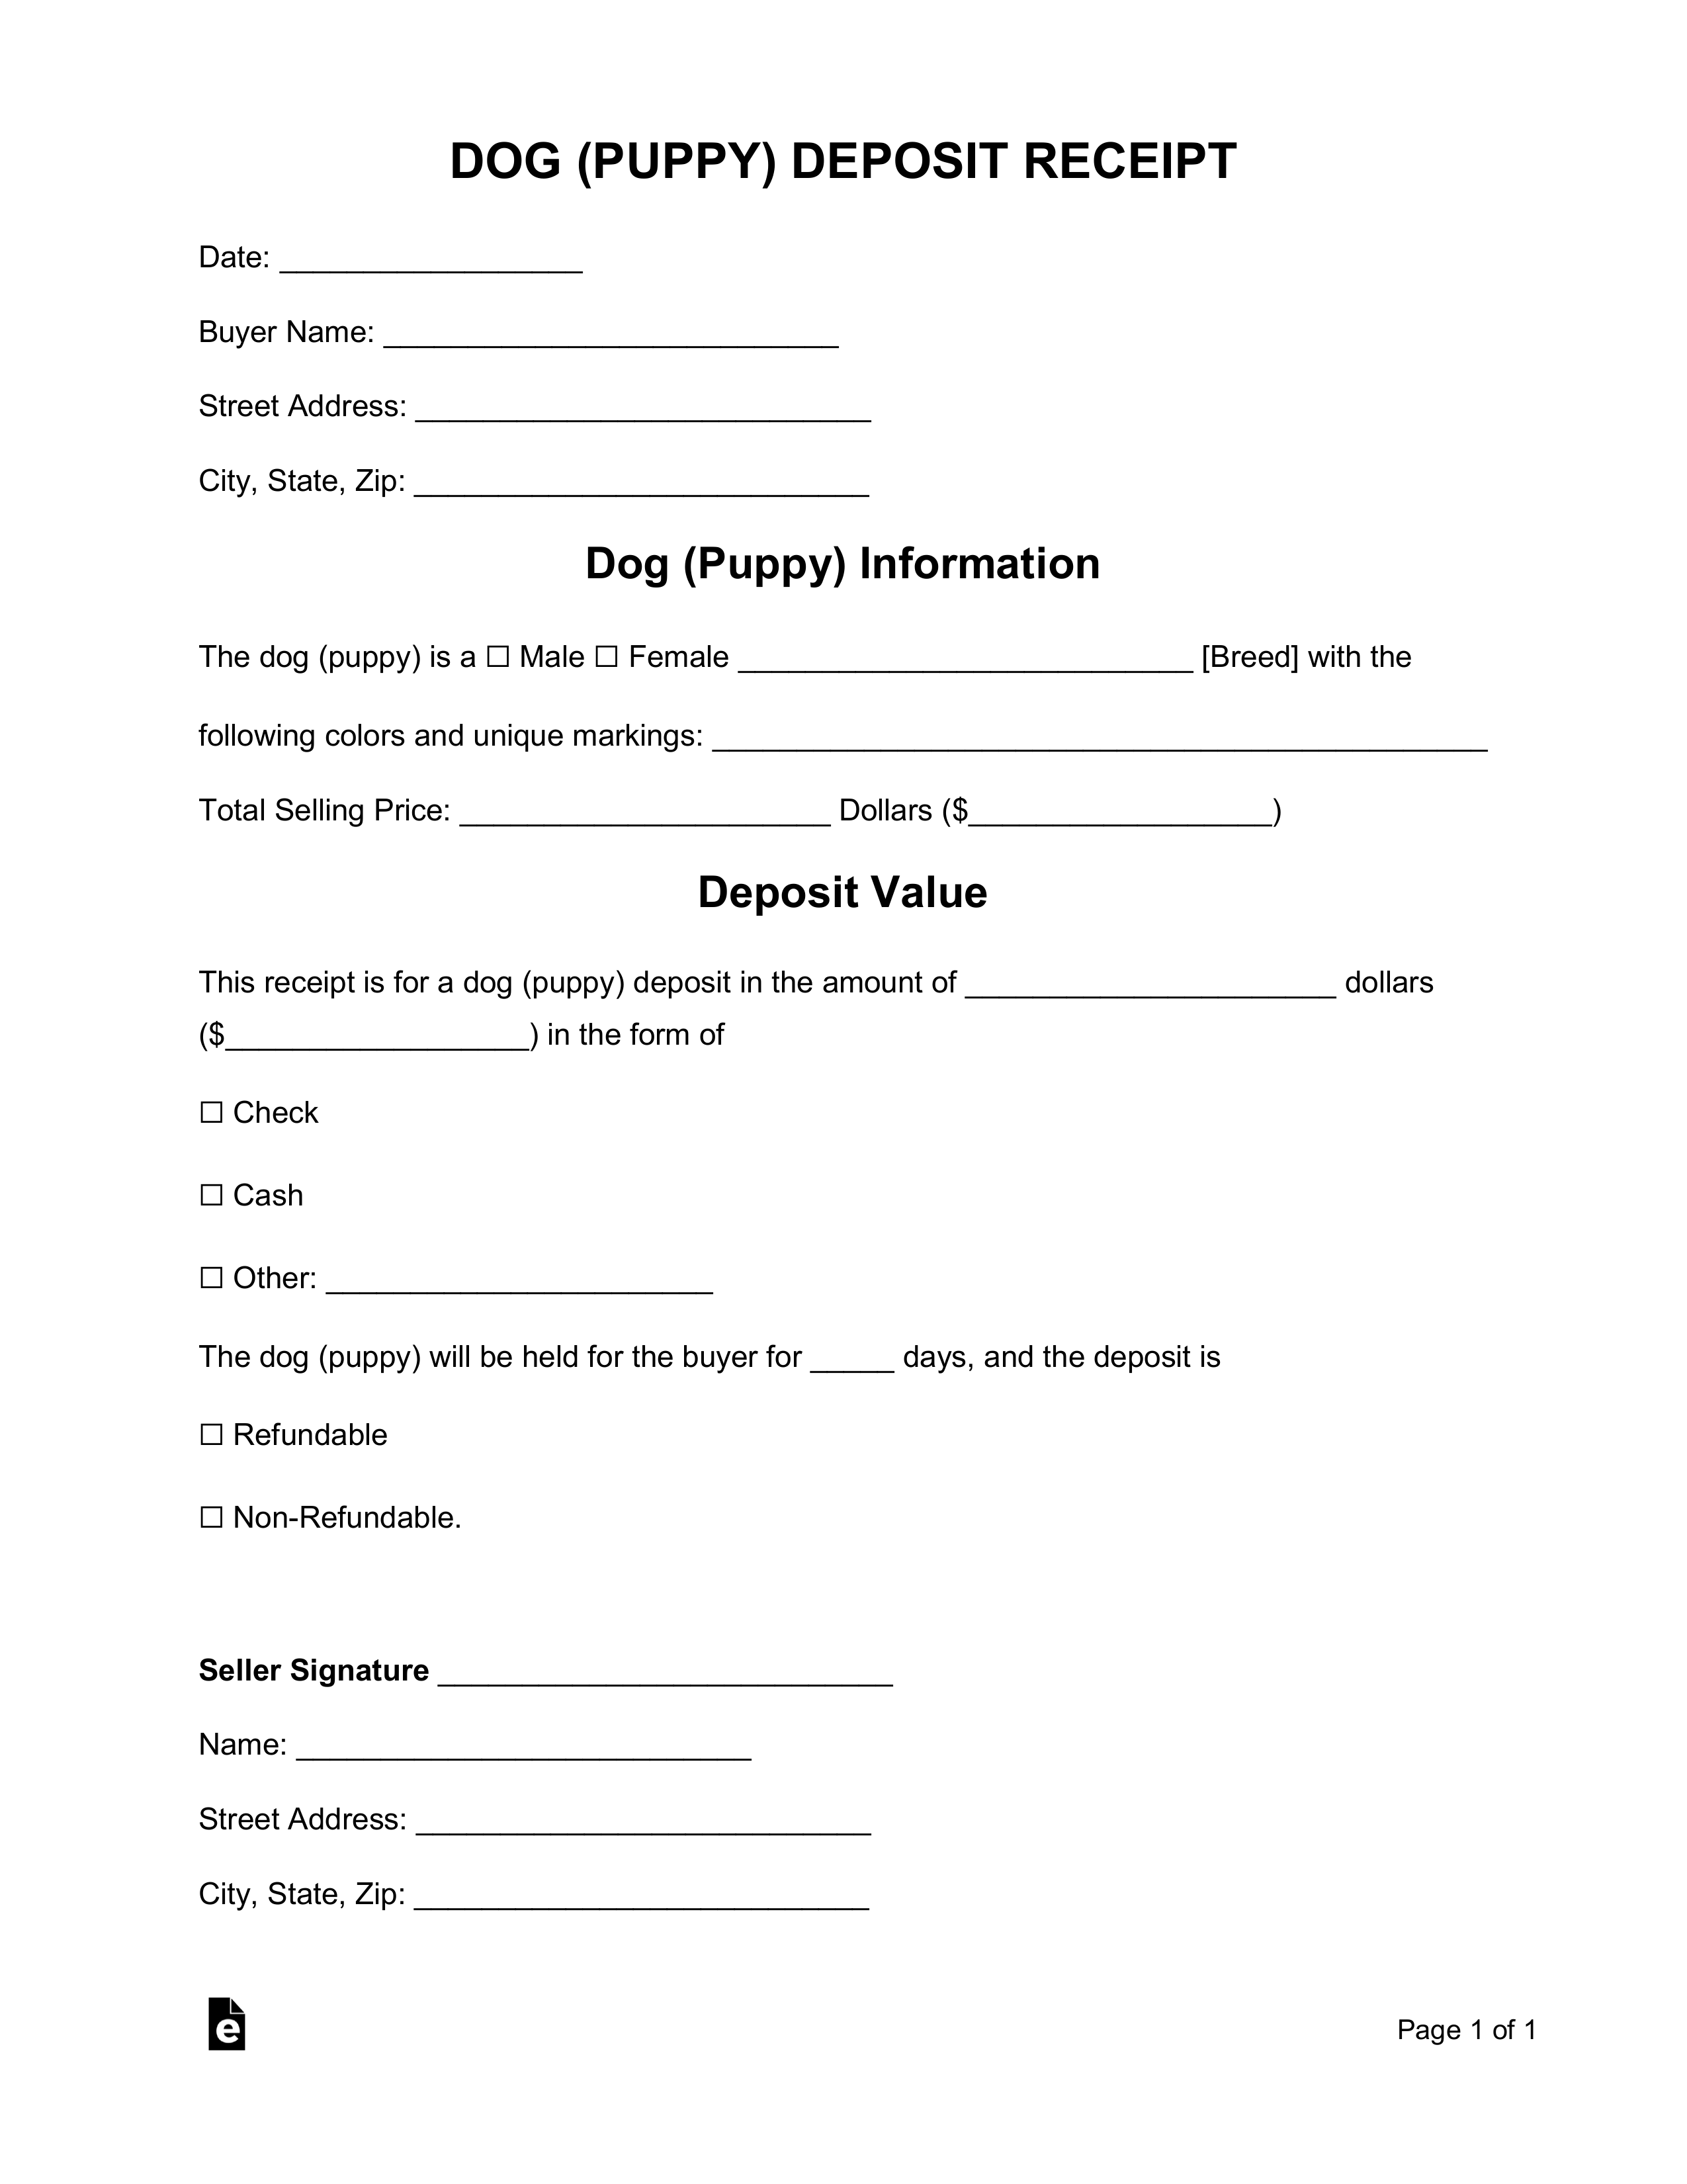 Free Dog (Puppy) Deposit Receipt Template - Word  PDF – eForms Within Deposit Form For Bill Of Sale Throughout Deposit Form For Bill Of Sale